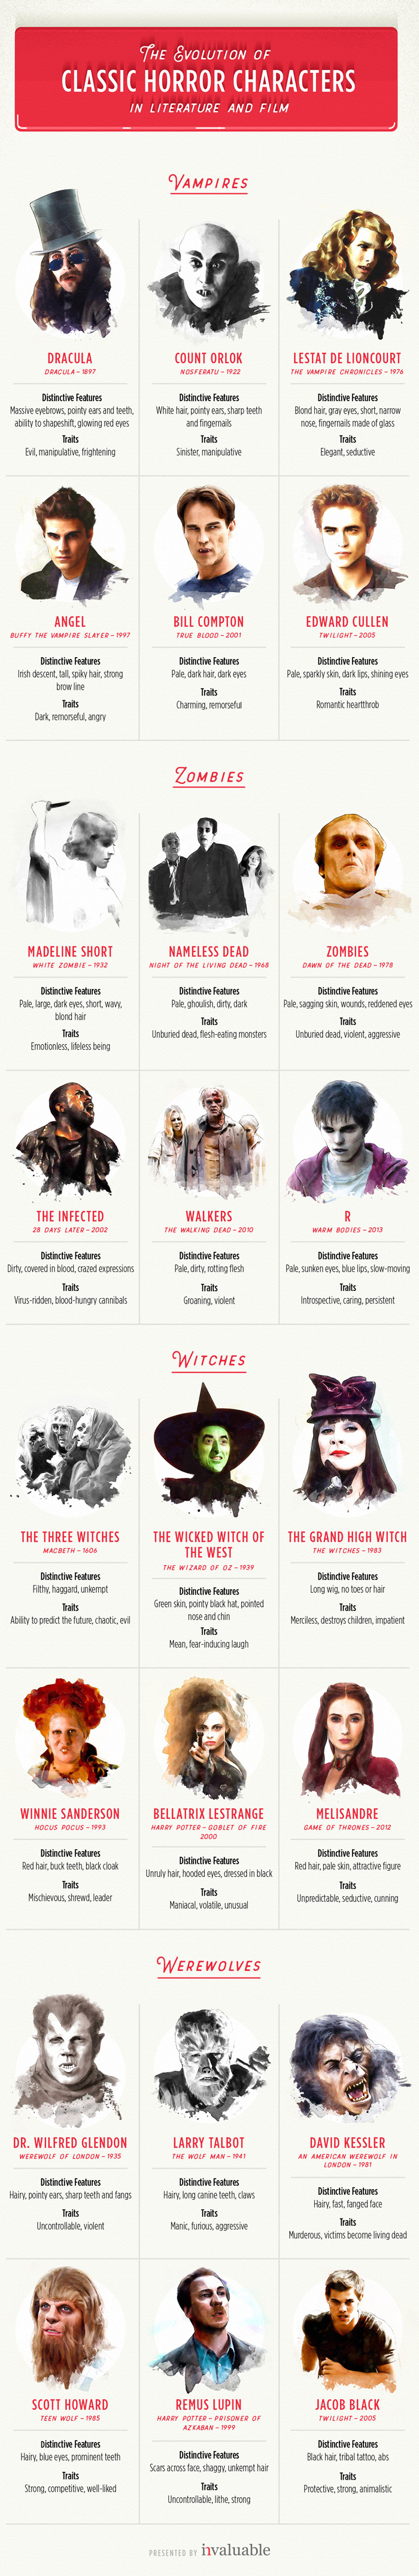 The Evolution of Classic Horror Characters